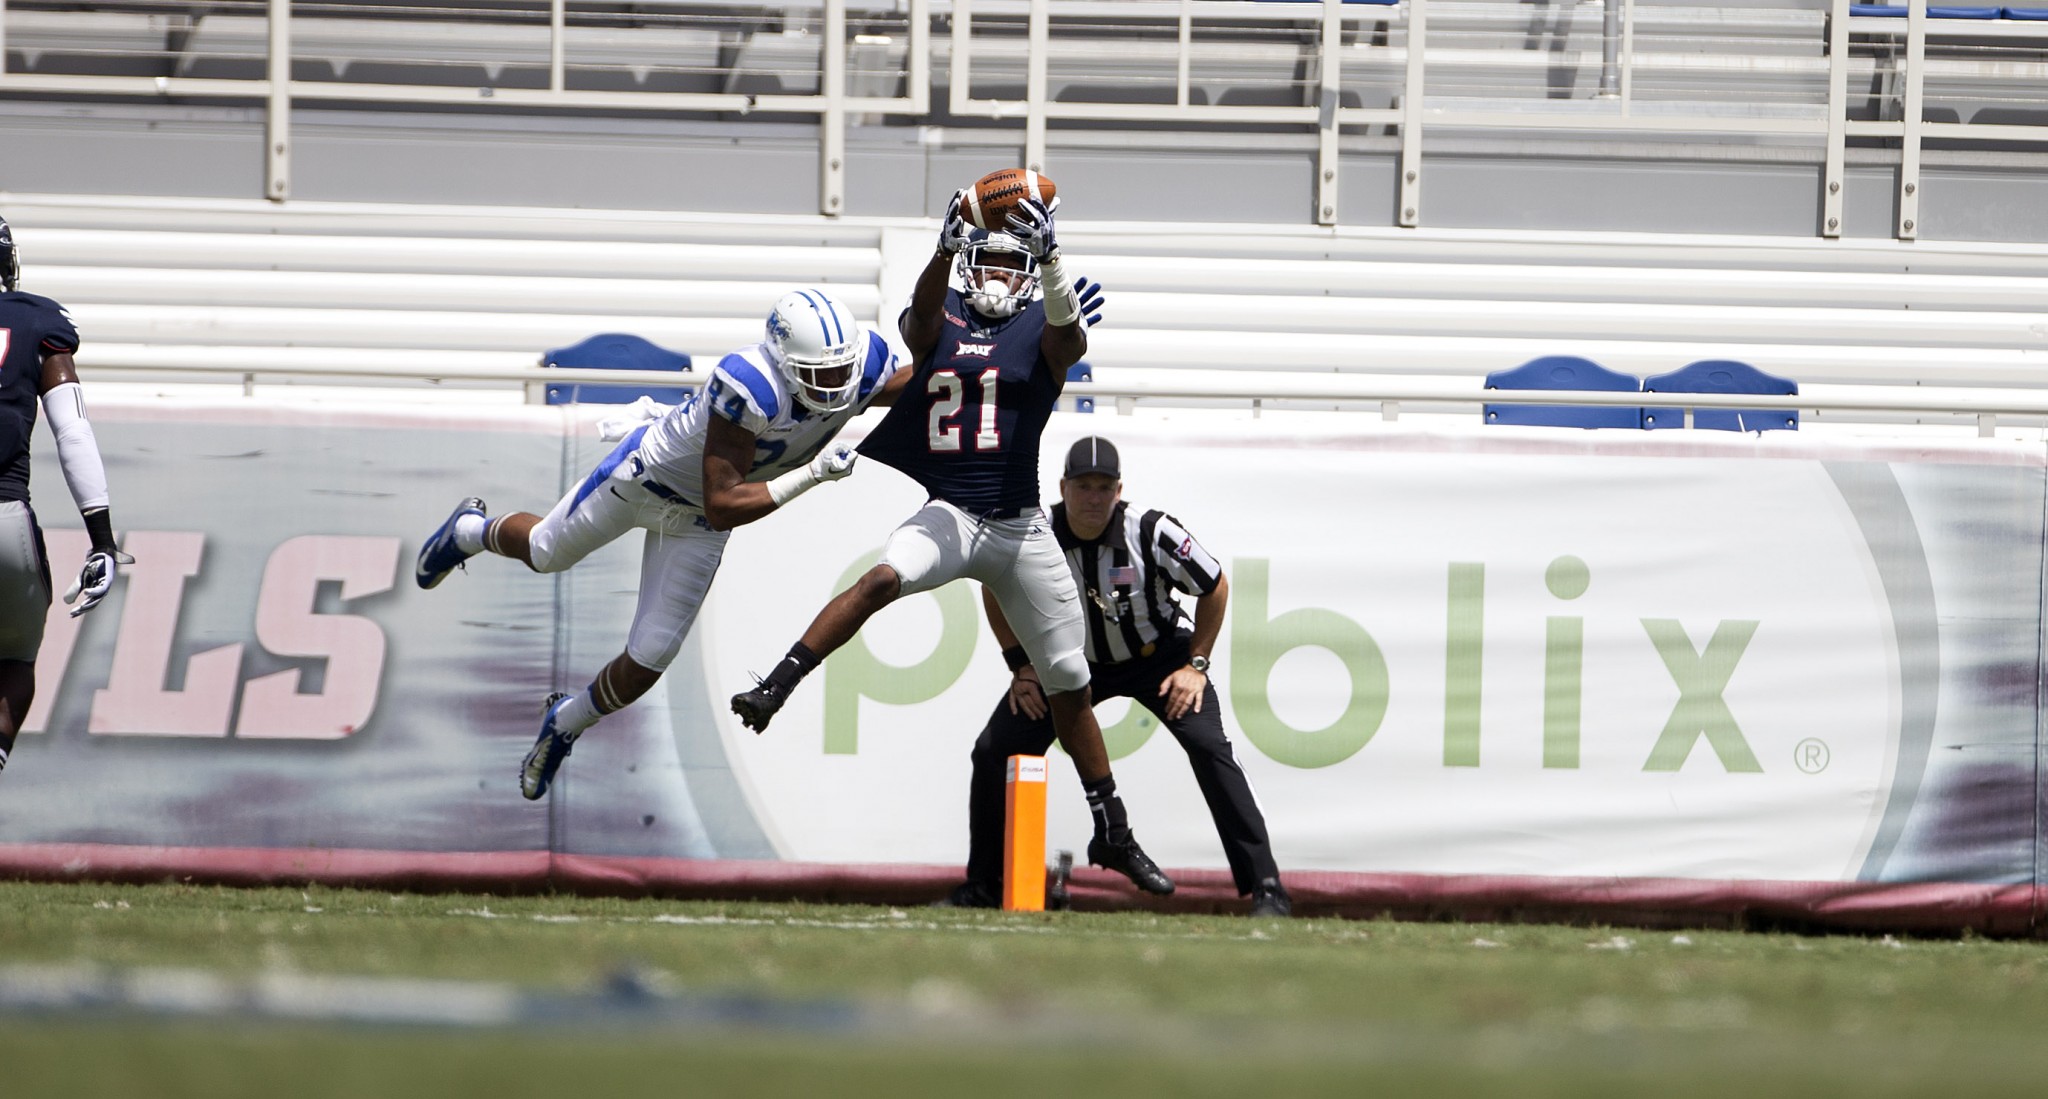 Middle Tennessee's Terry Pettis (84) and florida Atlantic's Tony Moore (21) fight for a pass during the first half of a NCAA football game in Boca Raton, Fla., Saturday, Sept. 21, 2013. (AP Photo/J Pat Carter)